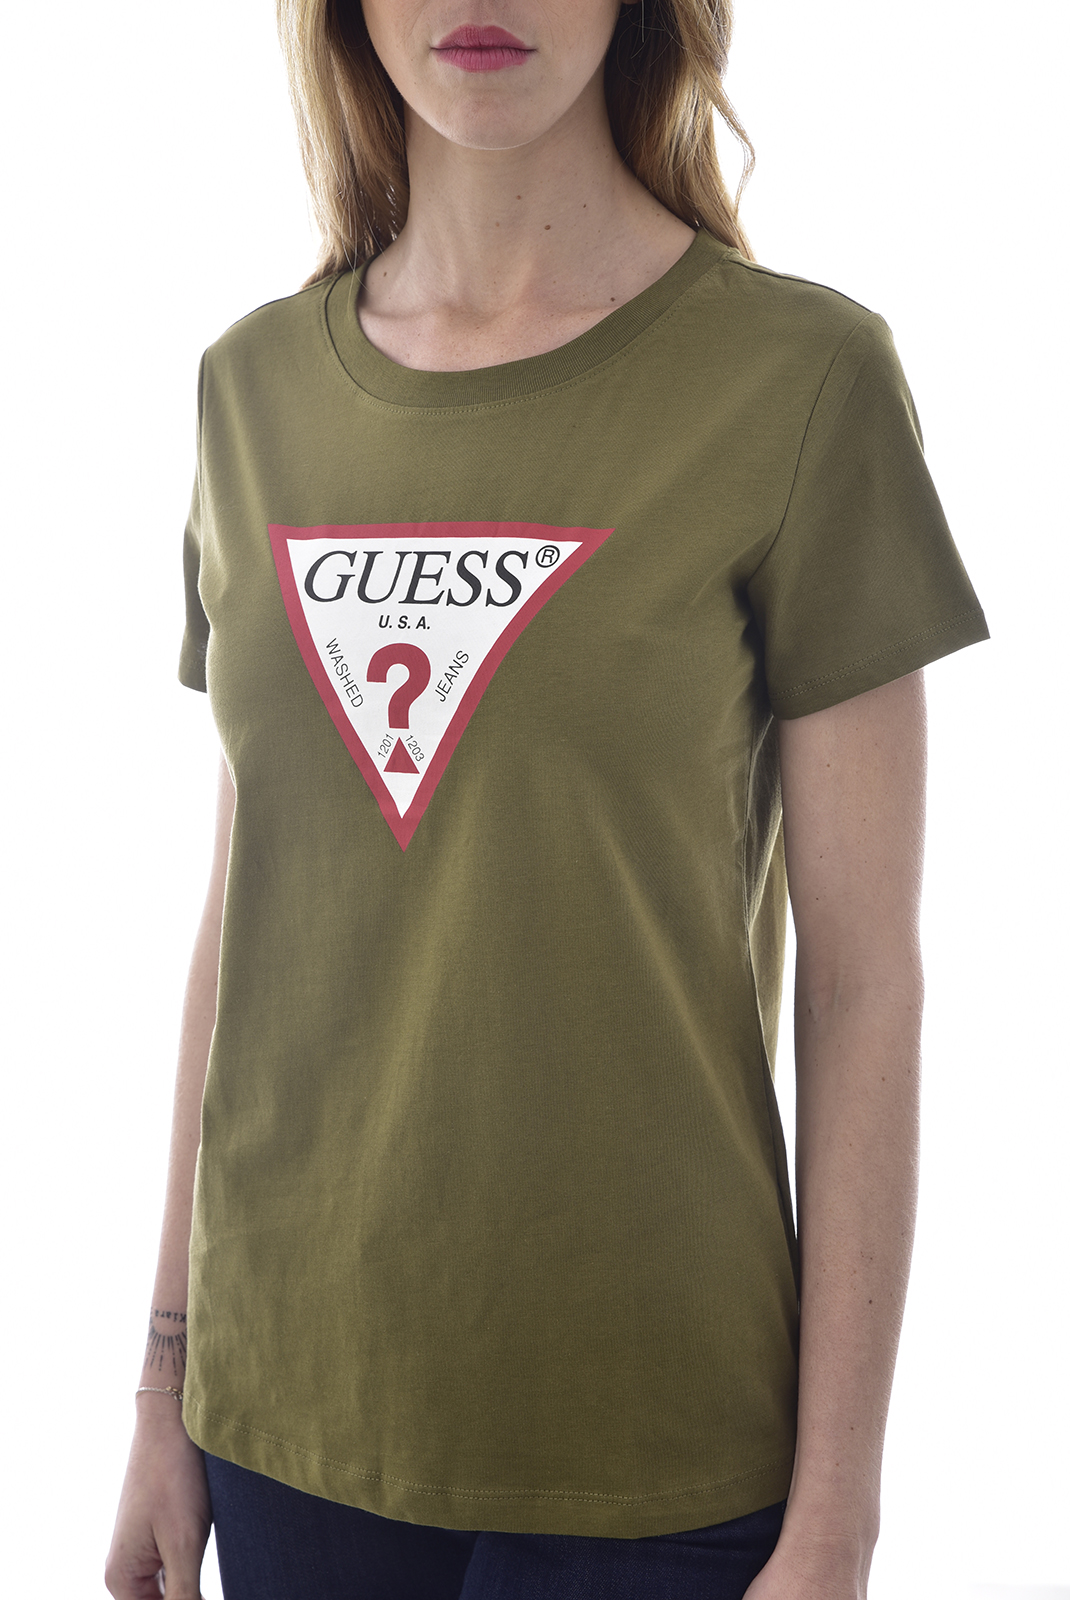 Guess Tee-shirt Vert À Manches Courtes Col Rond Triangle